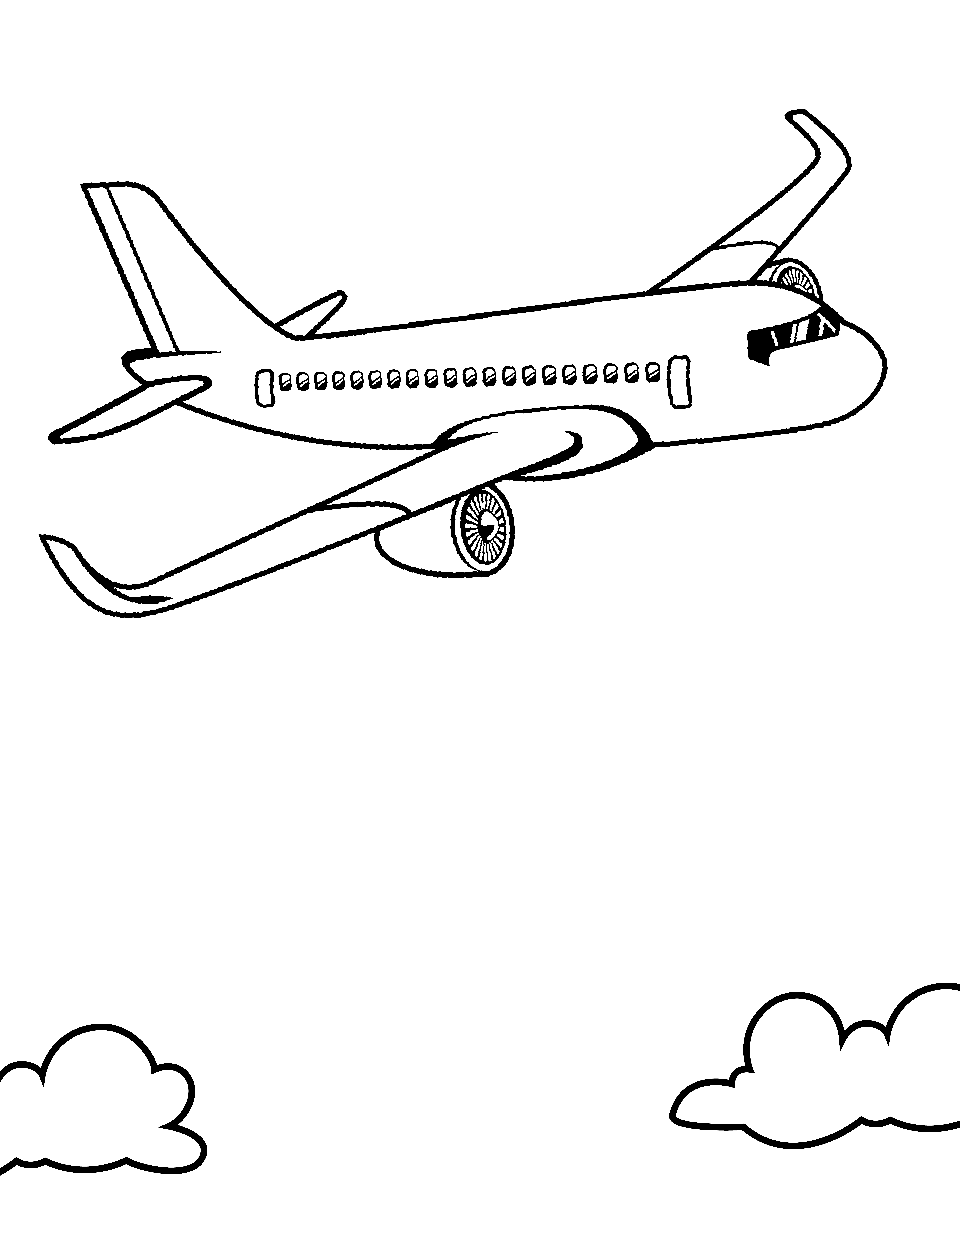 Elegant Airliner Airplane Coloring Page - A large passenger plane cruising at high altitude with a clear sky.